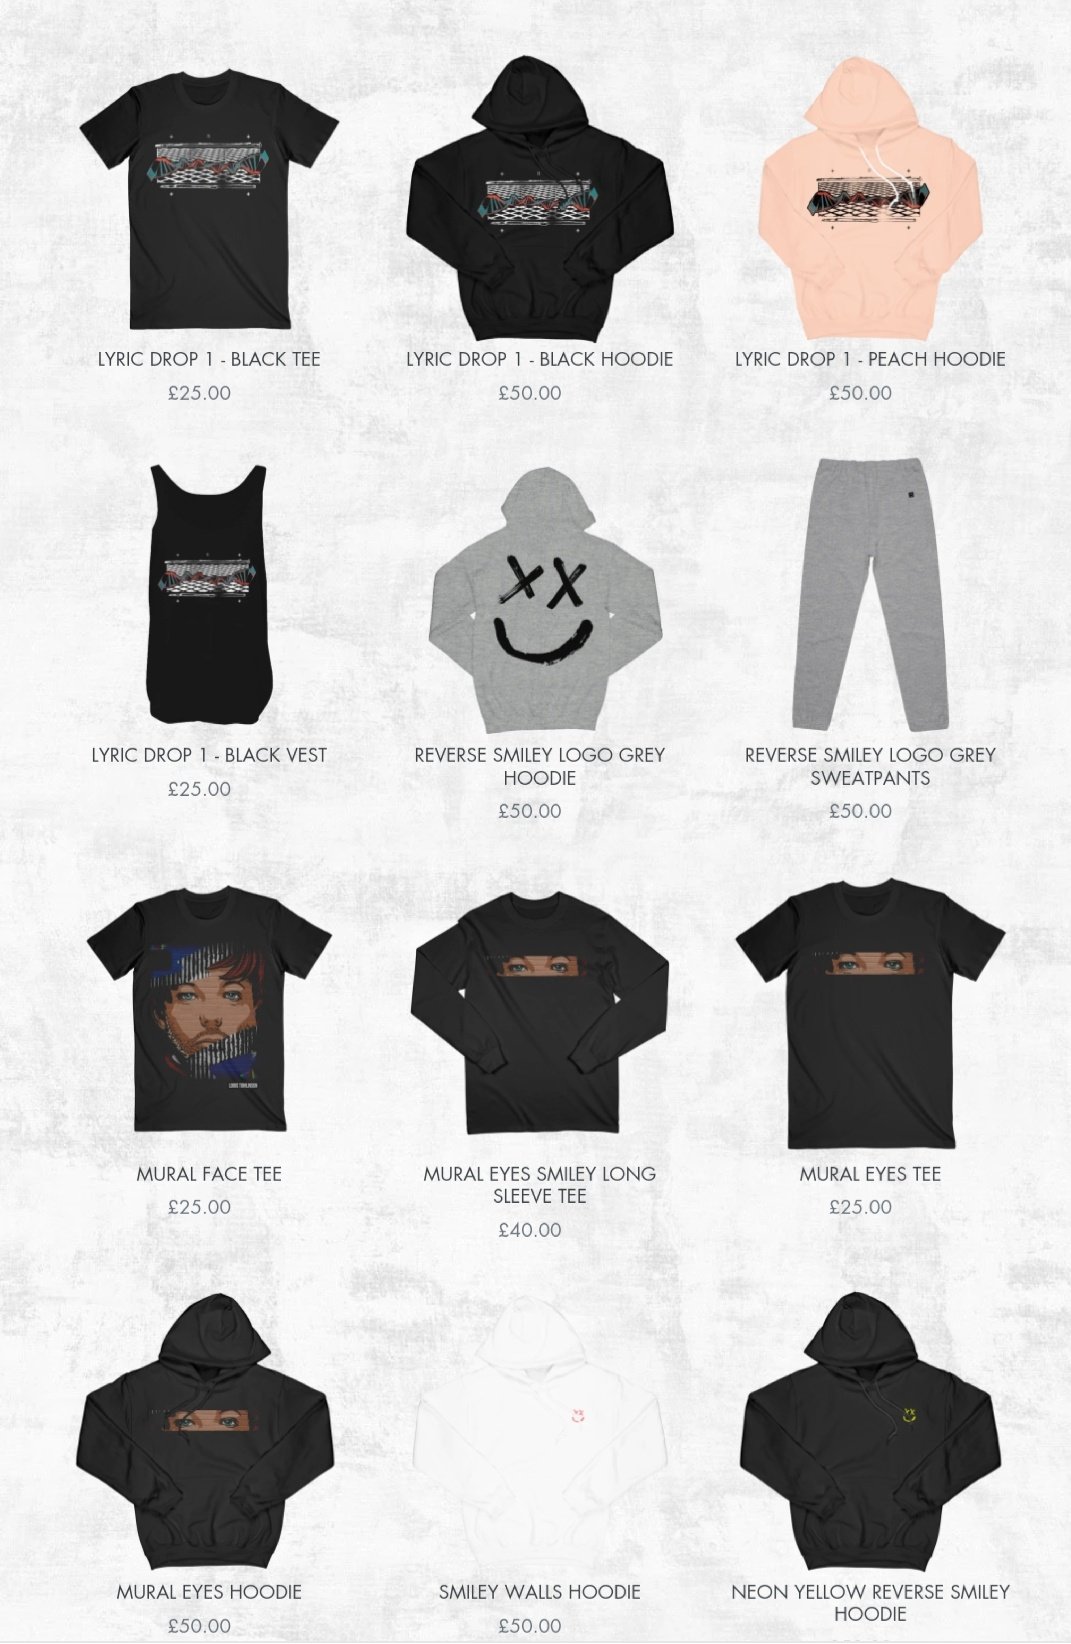 Limited Edition Smiley Summer Merch from Louis Tomlinson has dropped 